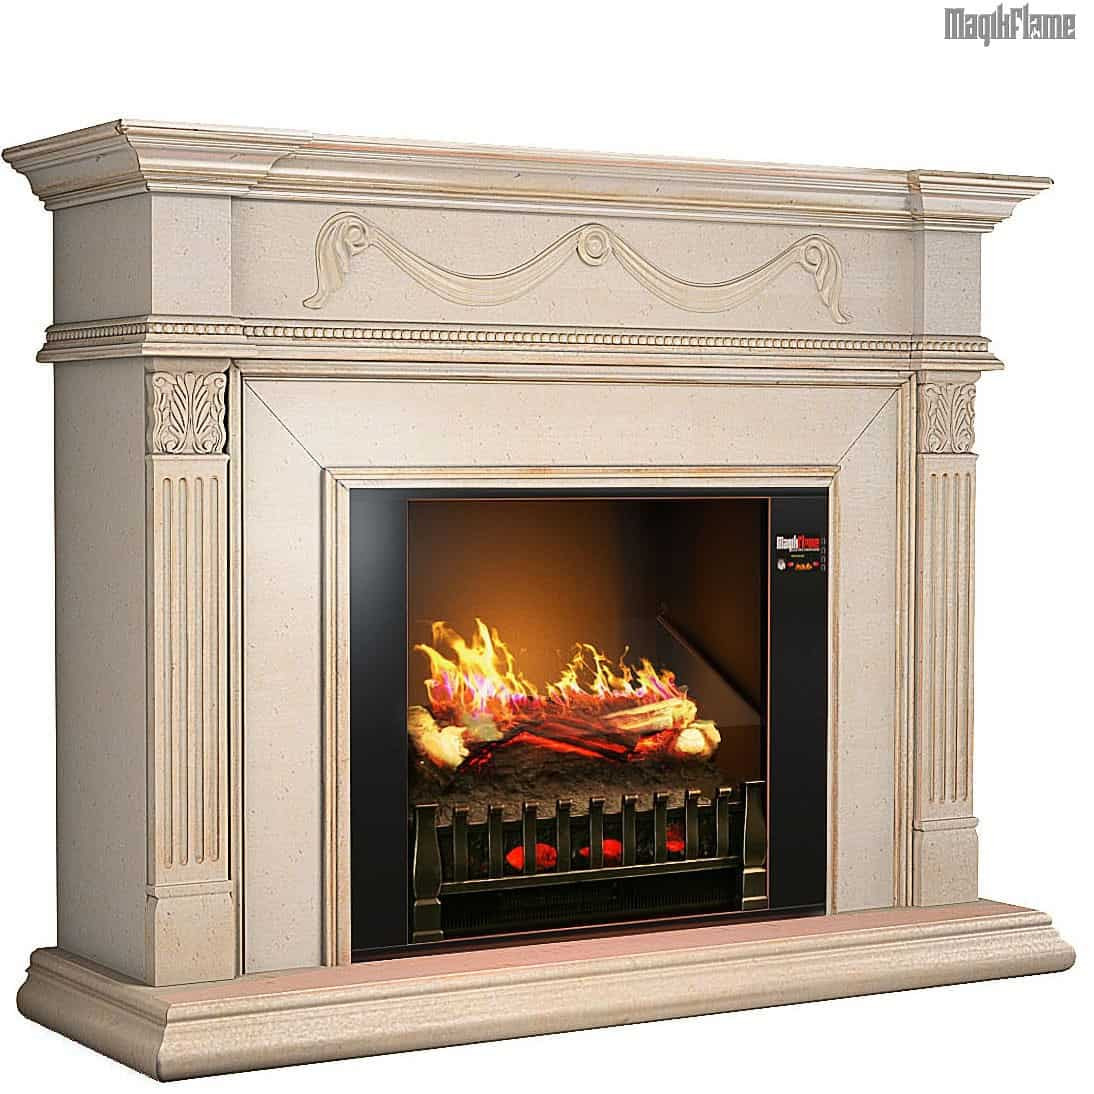 Most Realistic Looking Electric Fireplace Fireplace Guide by Linda